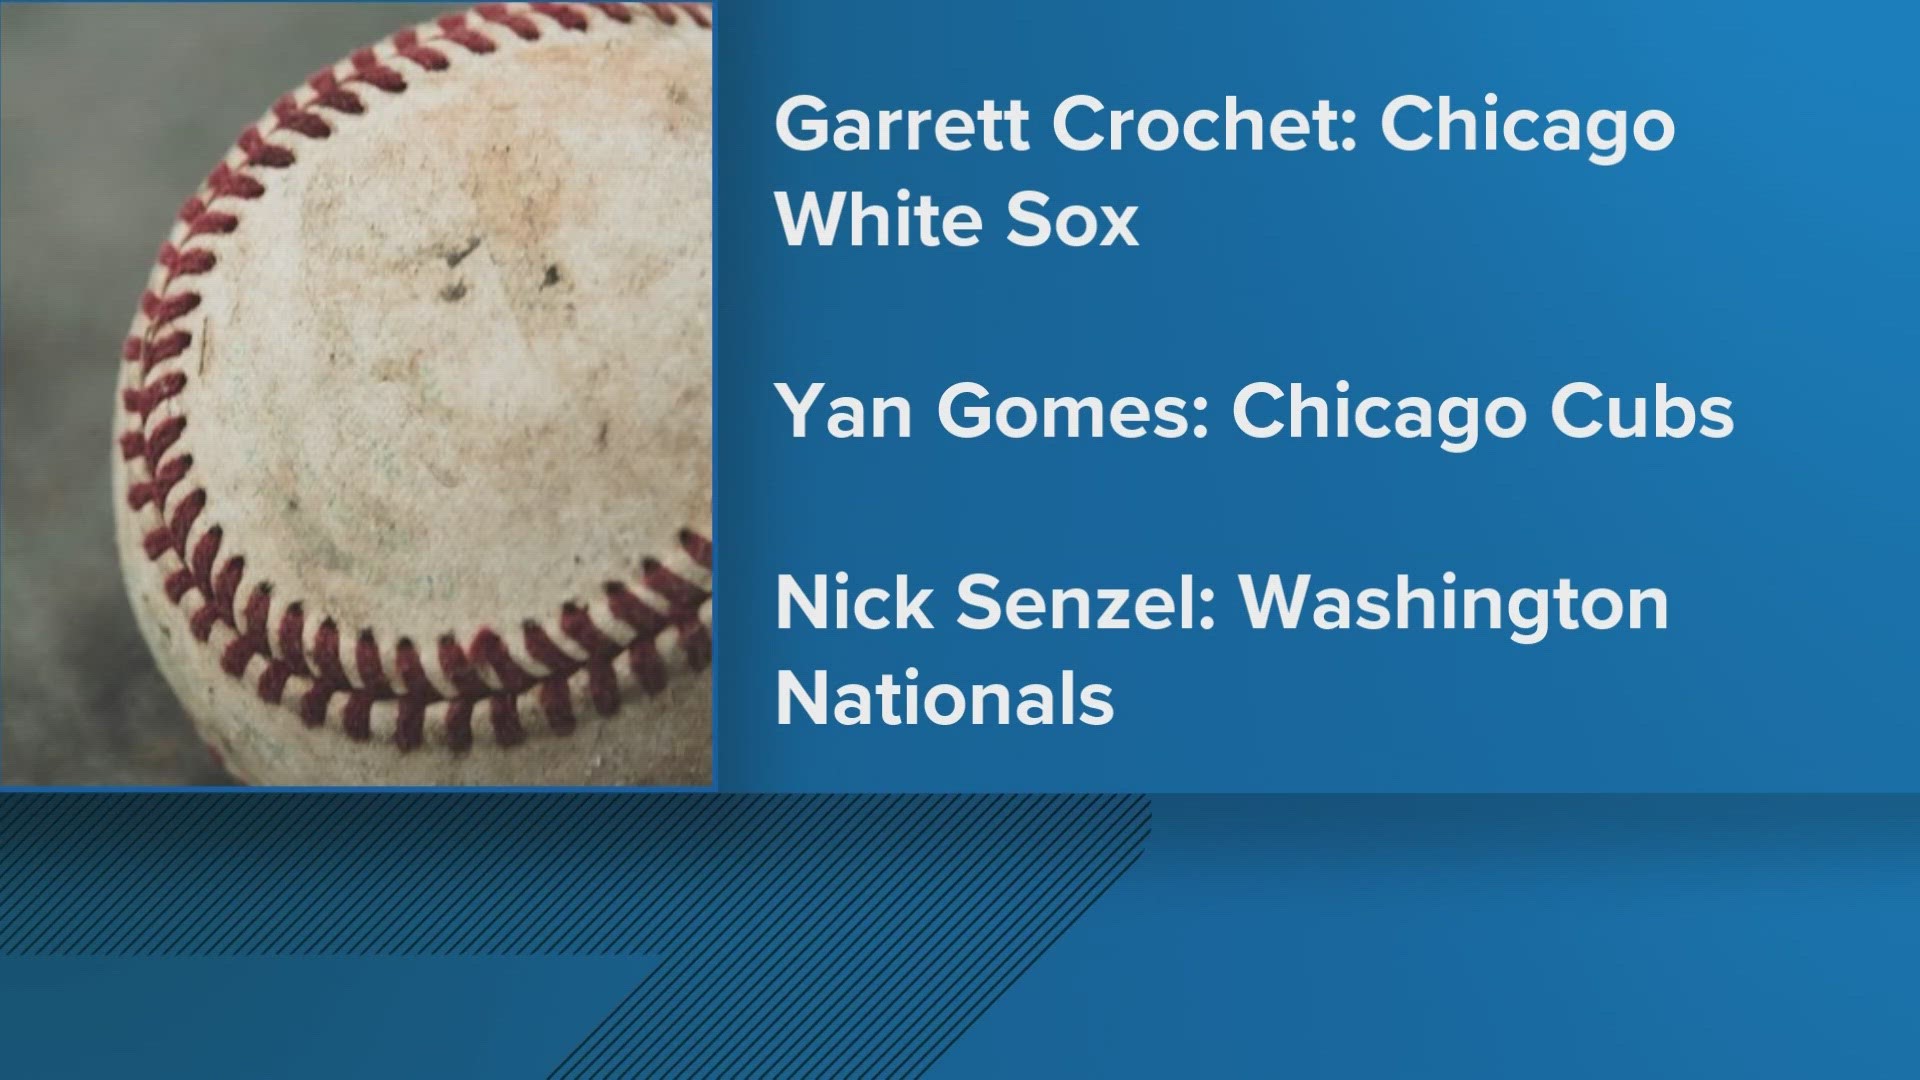 Garrett Crochet is starting for the White Sox, Yan Gomes is in his third season with the Cubs and Nick Senzel is starting with the Washington Nationals.